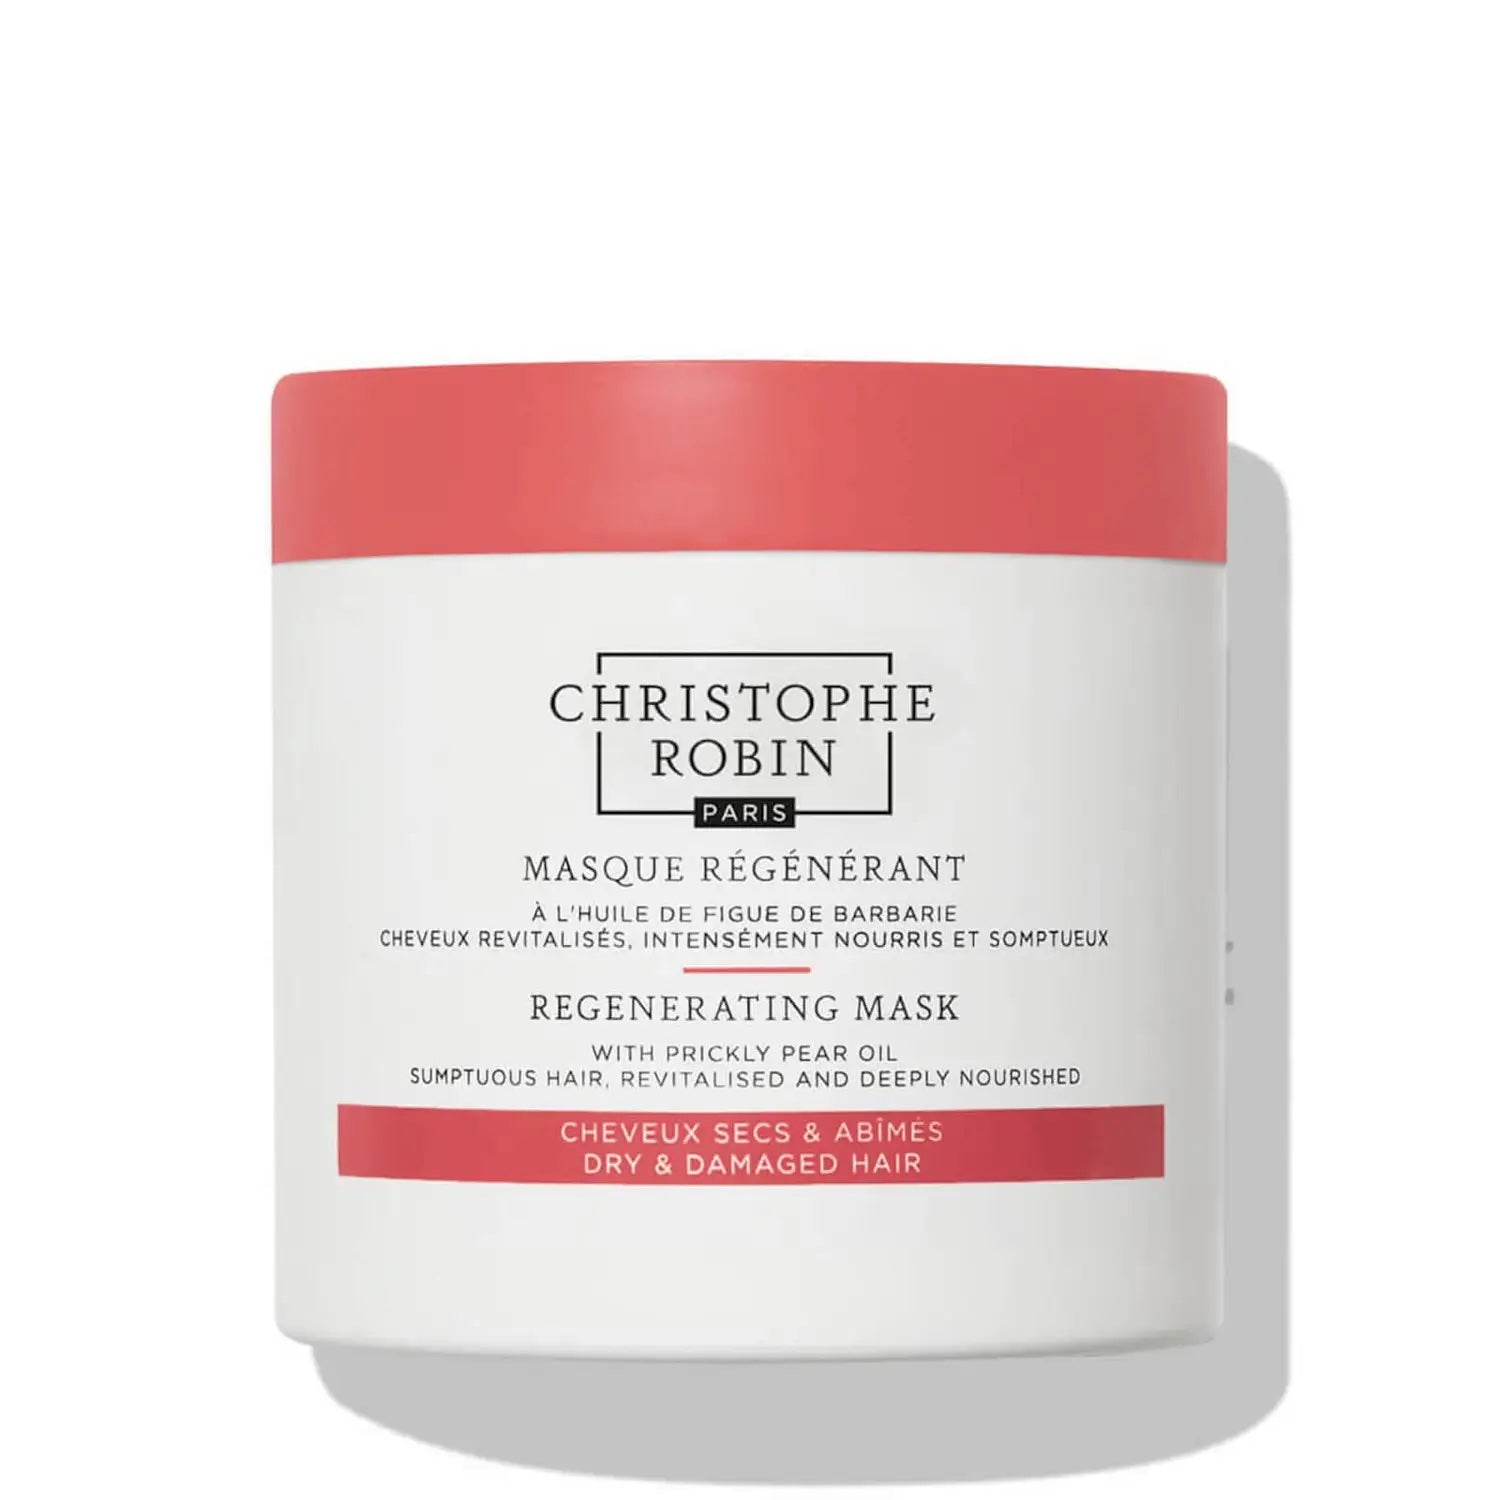 Christophe Robin 刺梨籽油柔亮修護髮膜 | Regenerating Mask with Prickly Pear Oil 250ml